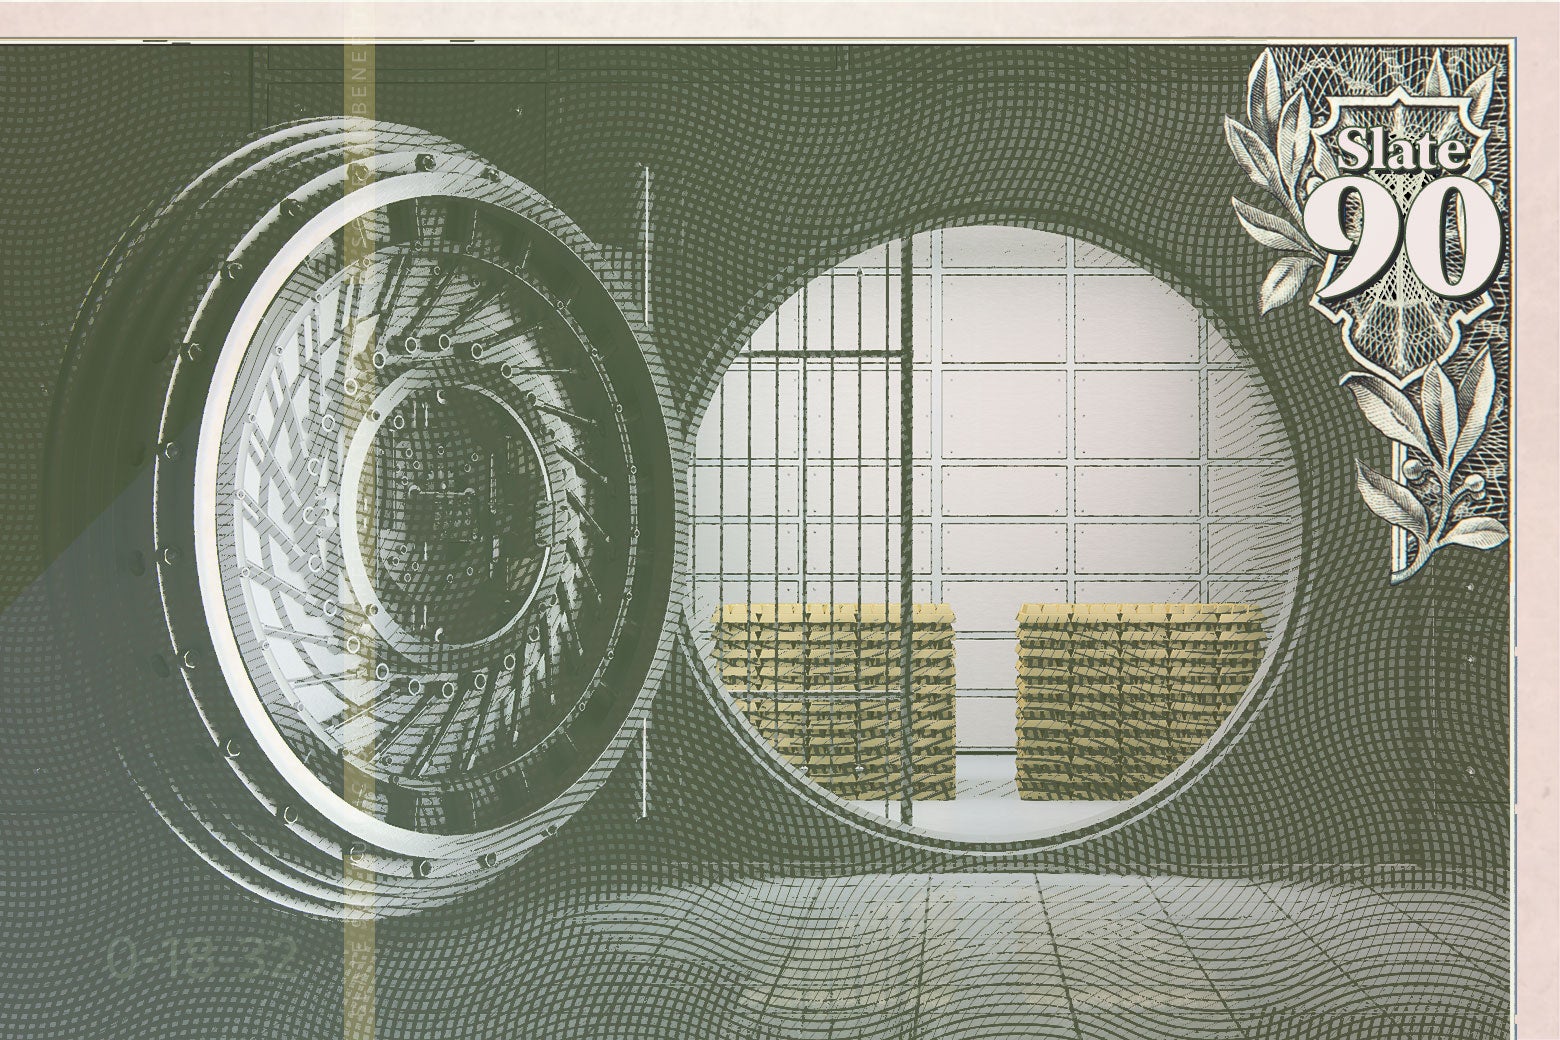 Paper currency showing an open bank vault.